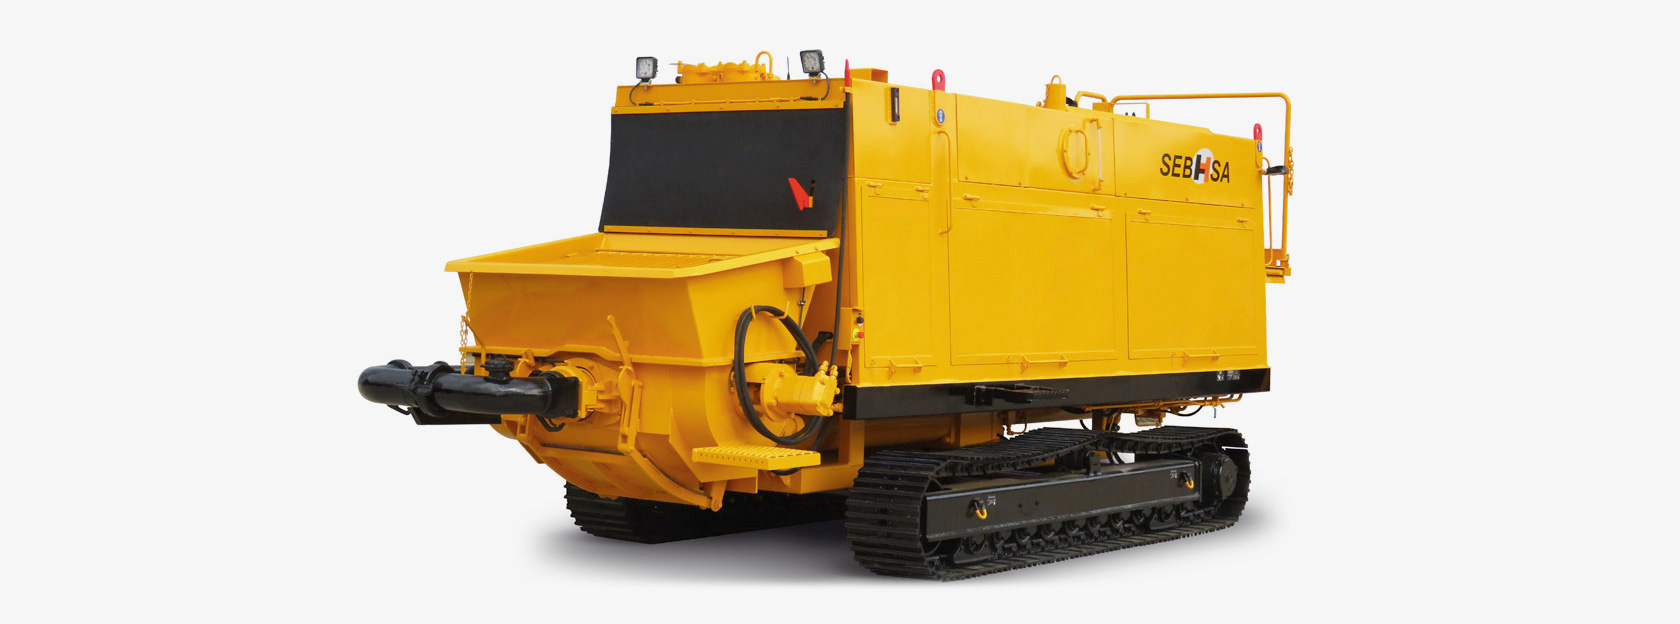 The SEBHSA BD-4147.OR tracked concrete pump is the biggest tracked concrete pump for the biggest projects.